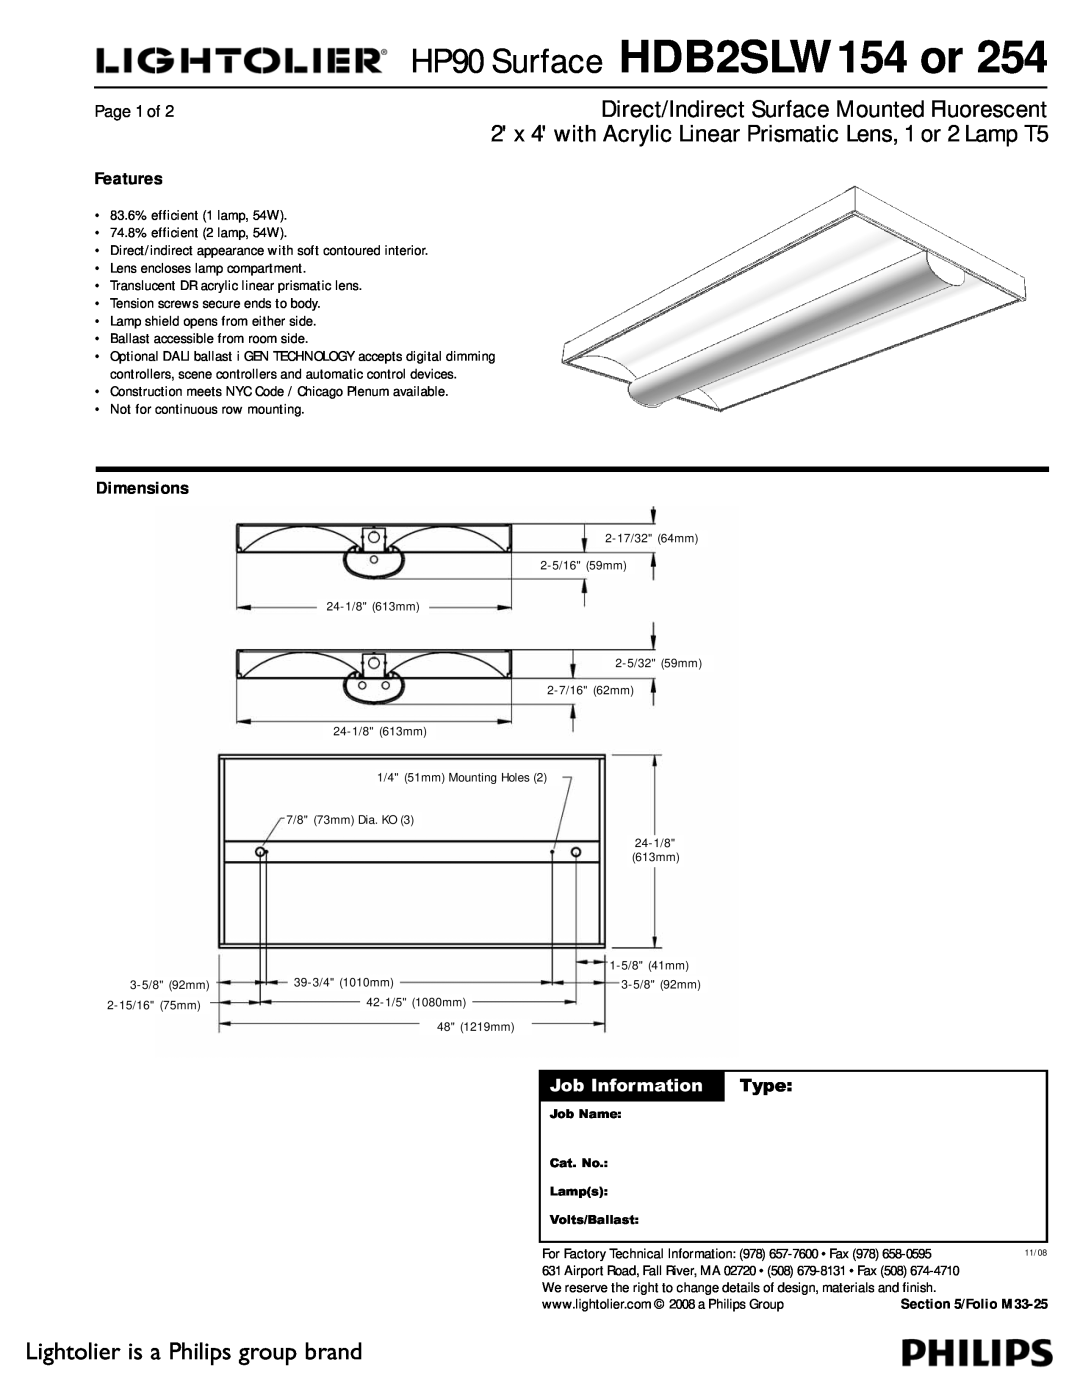 Lightolier dimensions HP90 Surface HDB2SLW154 or, Lightolier is a Philips group brand, Features, Dimensions, Page 1 of 